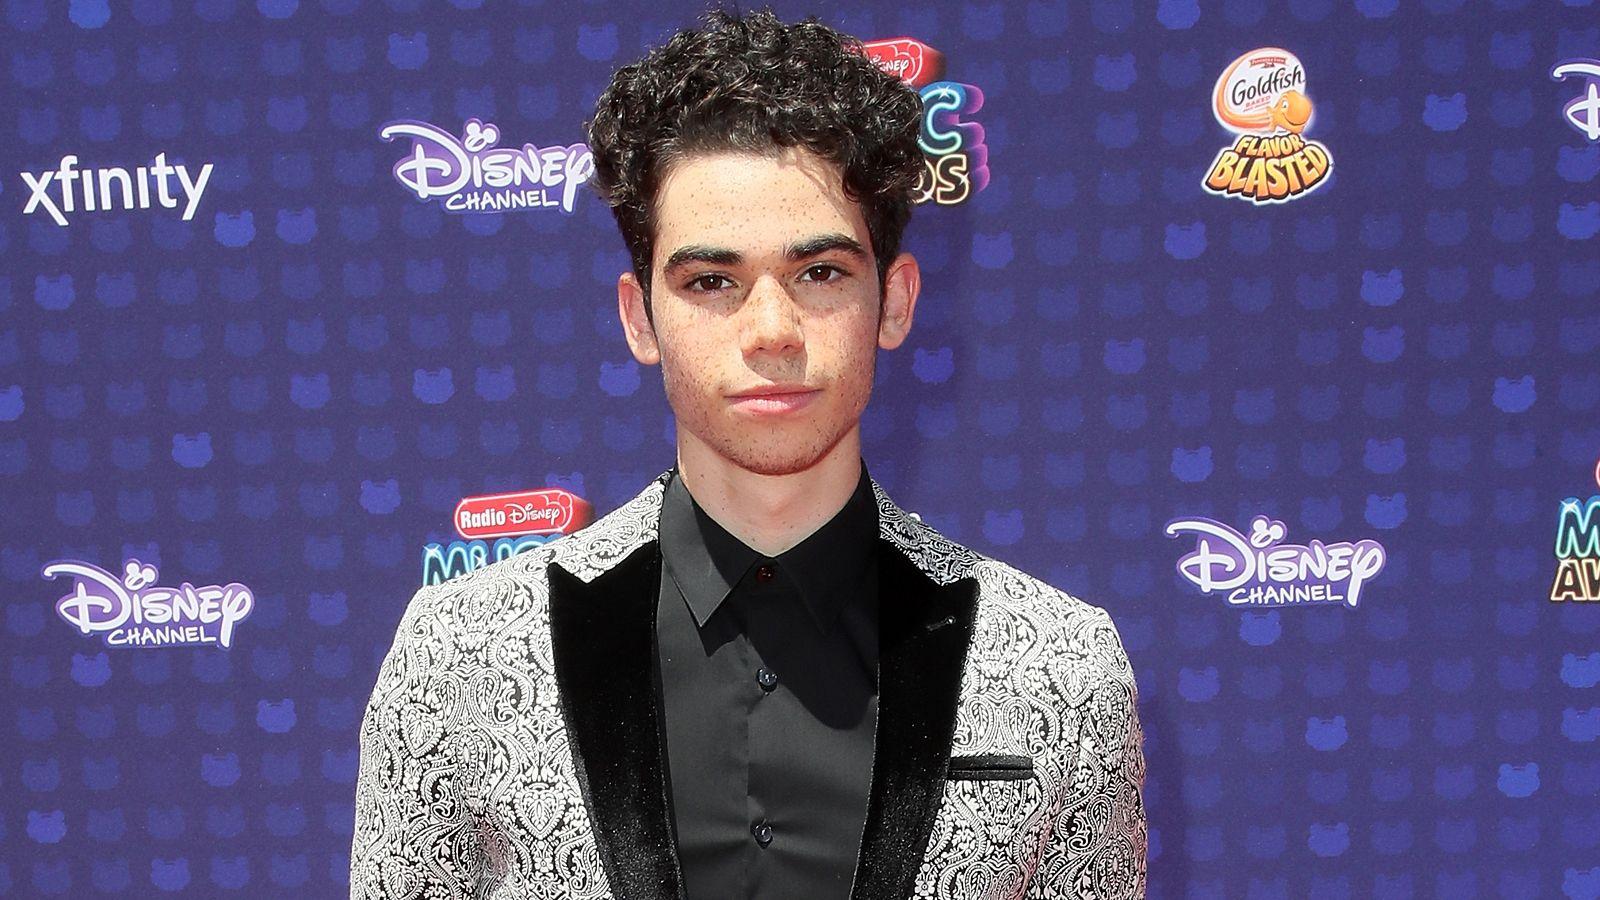 Watch Access Interview: Cameron Boyce Talks Britney Spears & His